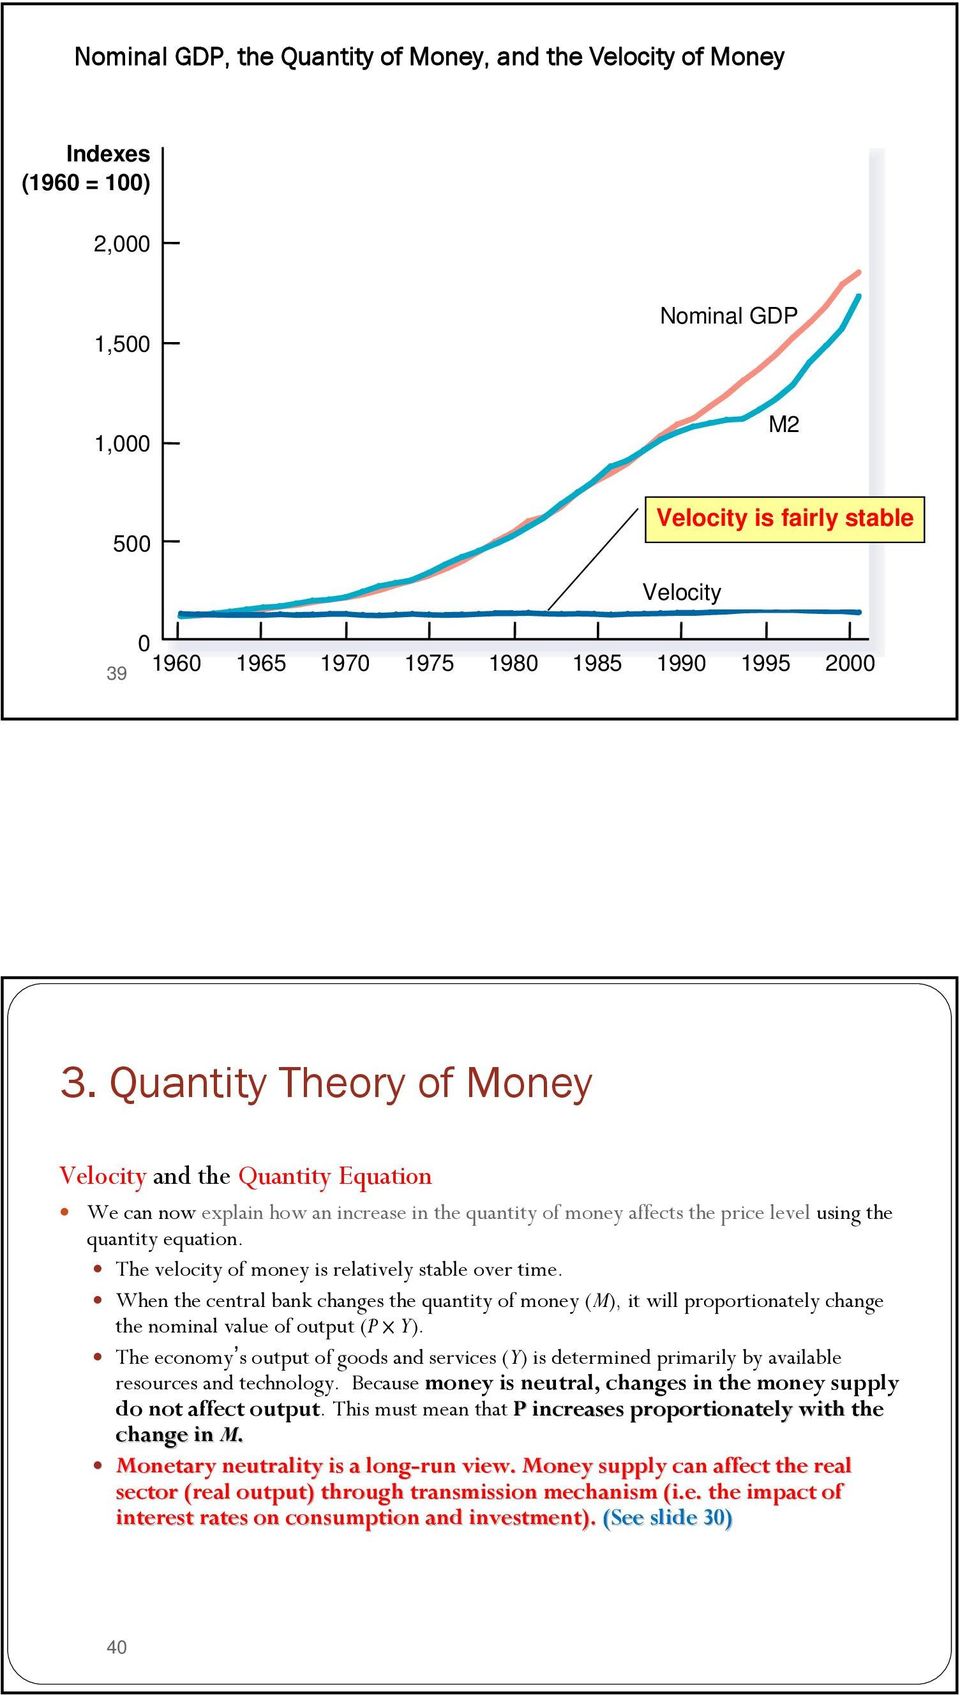 The velocity of money is relatively stable over time. When the central bank changes the quantity of money (M), it will proportionately change the nominal value of output (P Y).